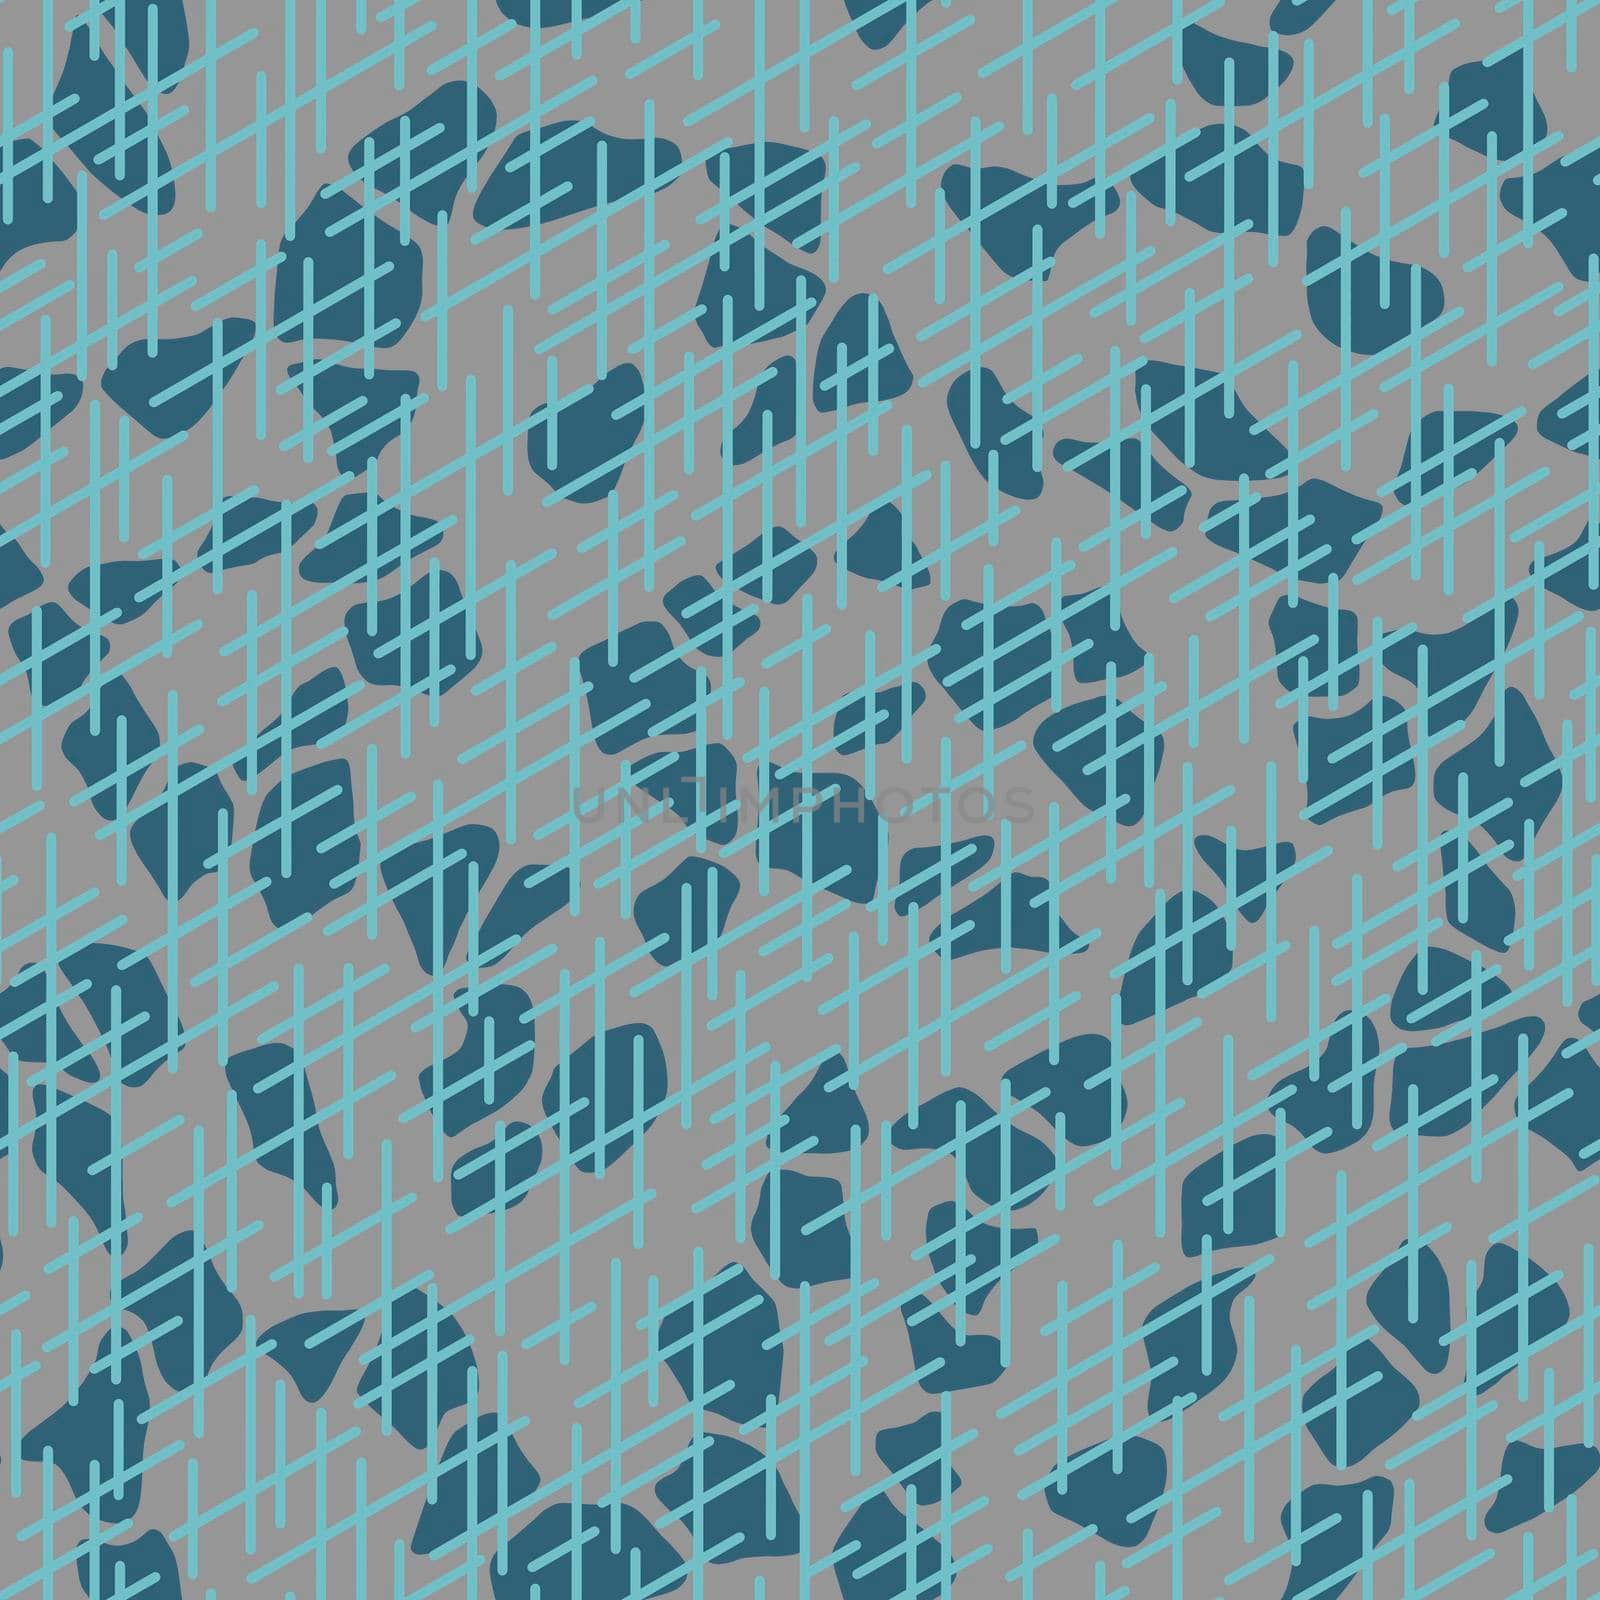 Randomly crossing lines making pattern.Chaotic short lines seamless pattern,chips and sticks modern repeatable motif.Good for print, textile,fabric, background, wrapping paper,